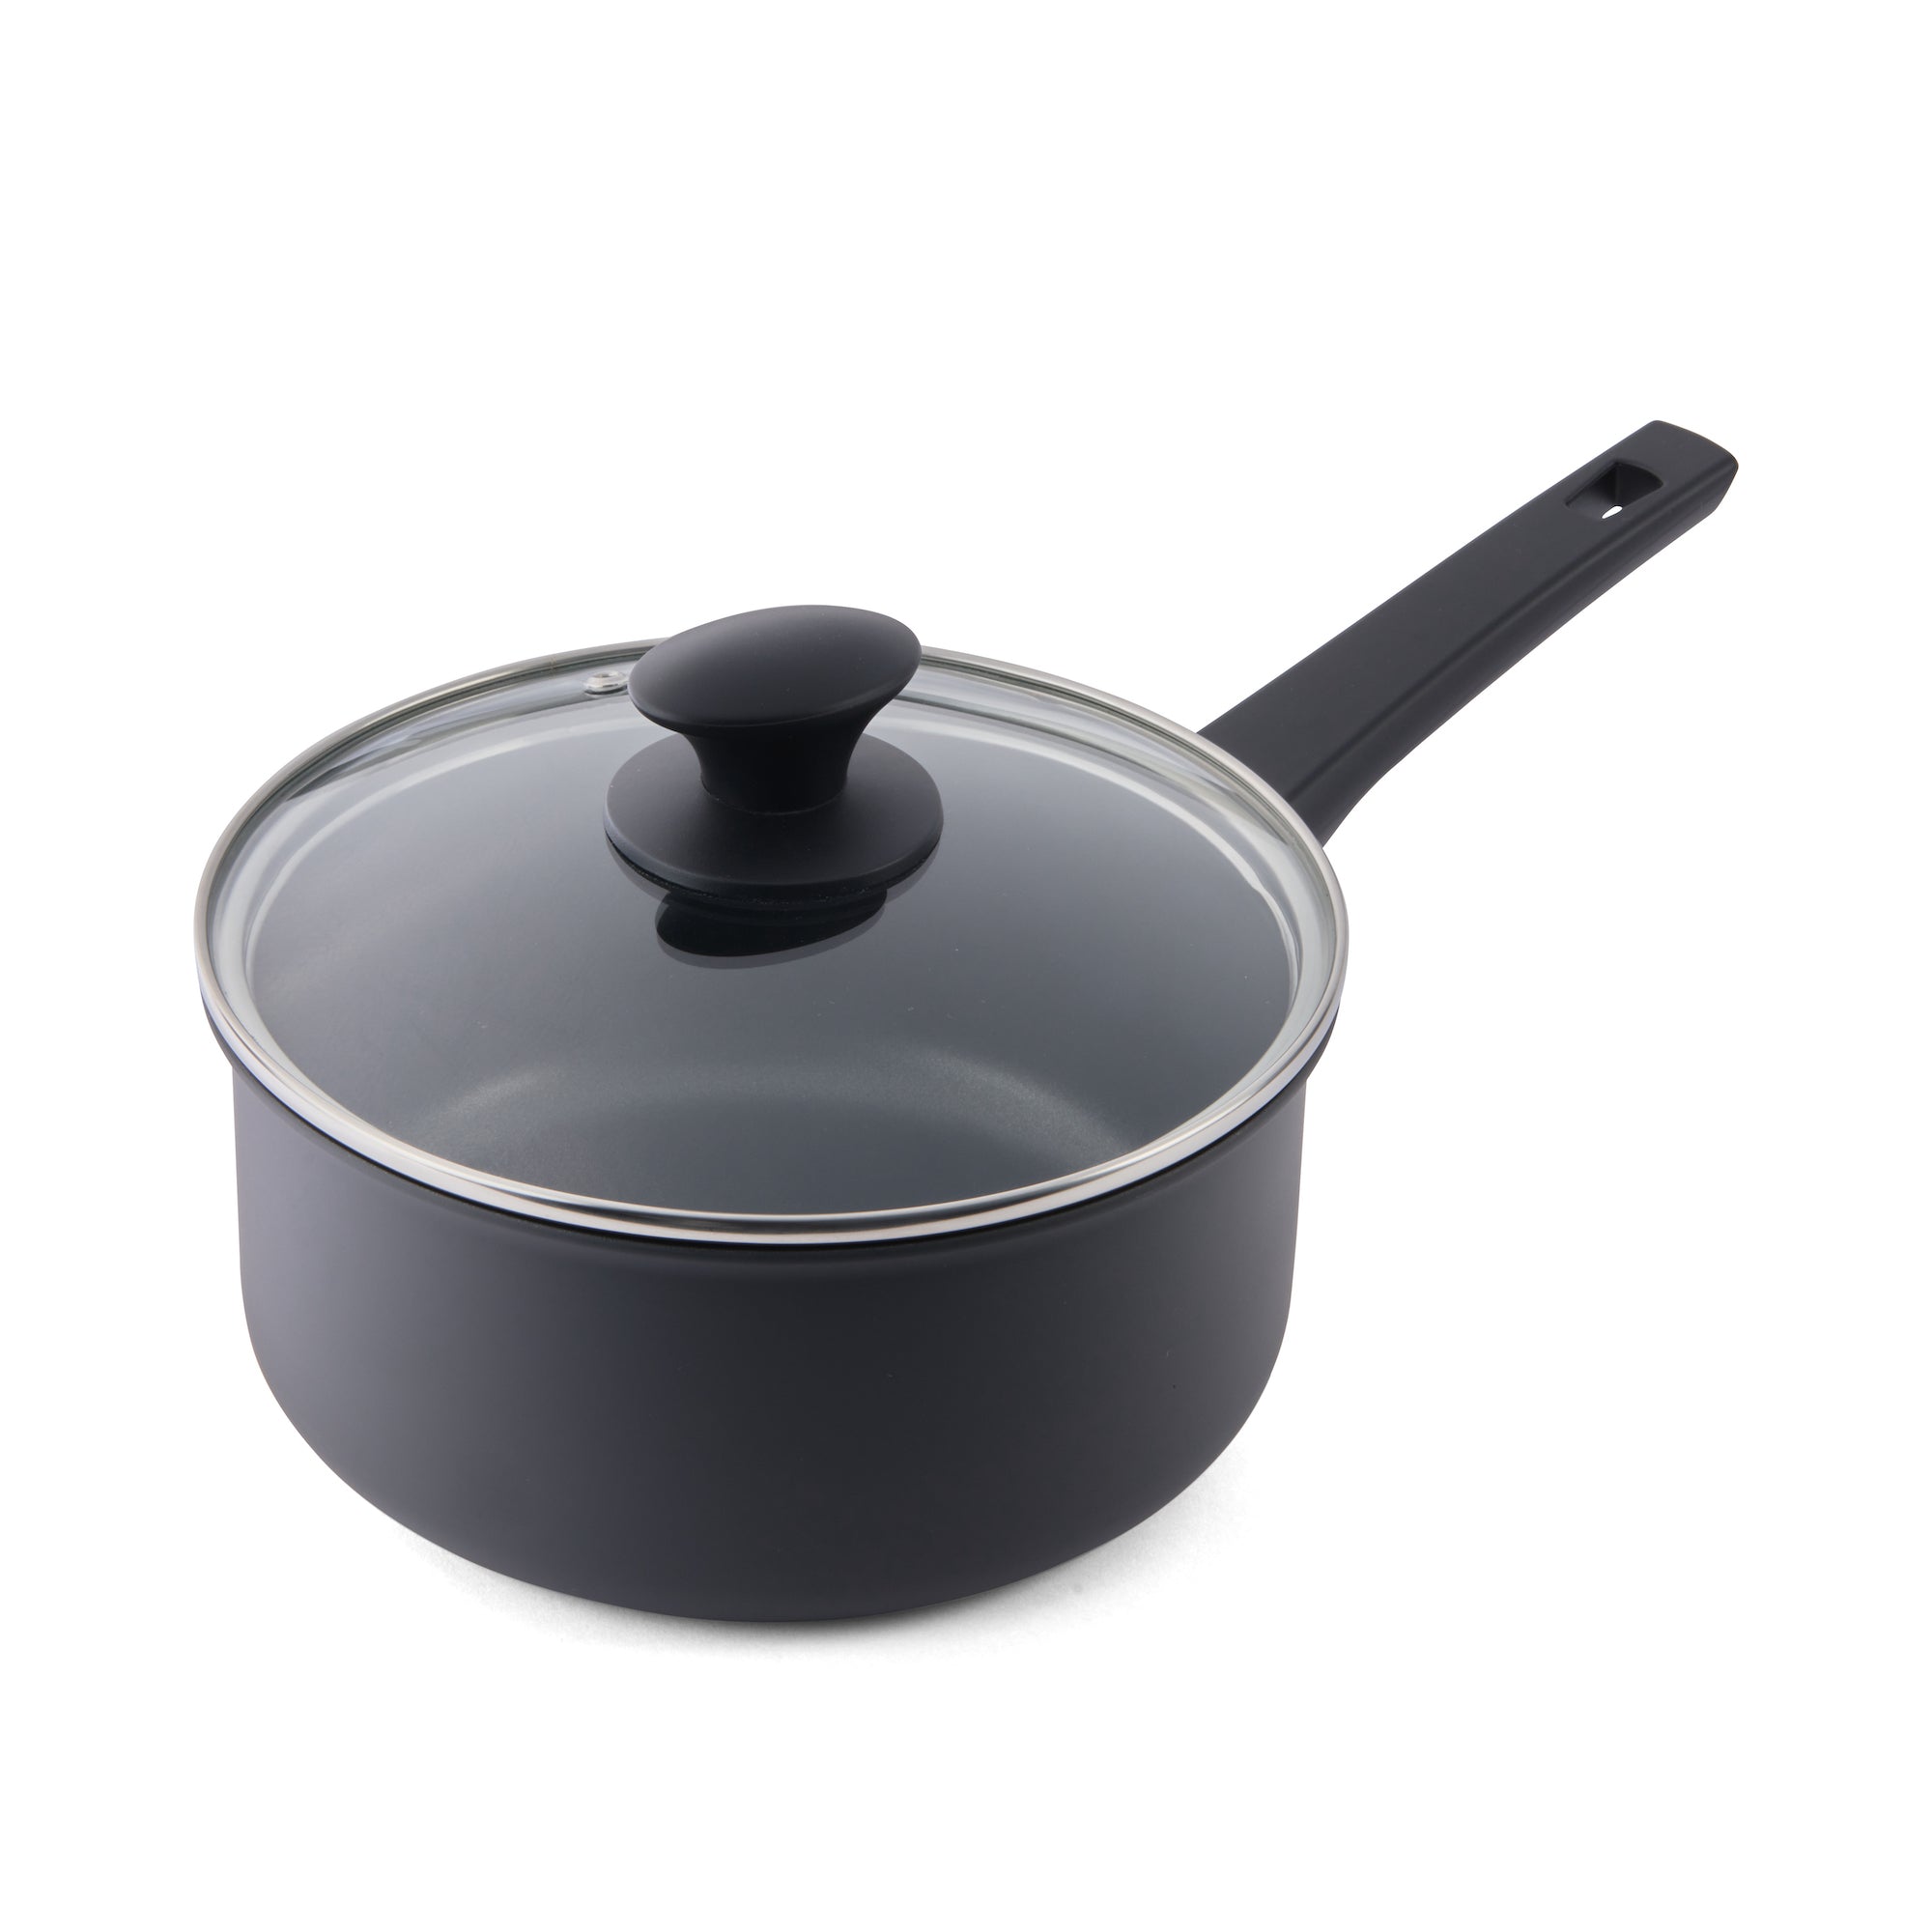 Buy Best Quality Cookware | Cuisipro USA